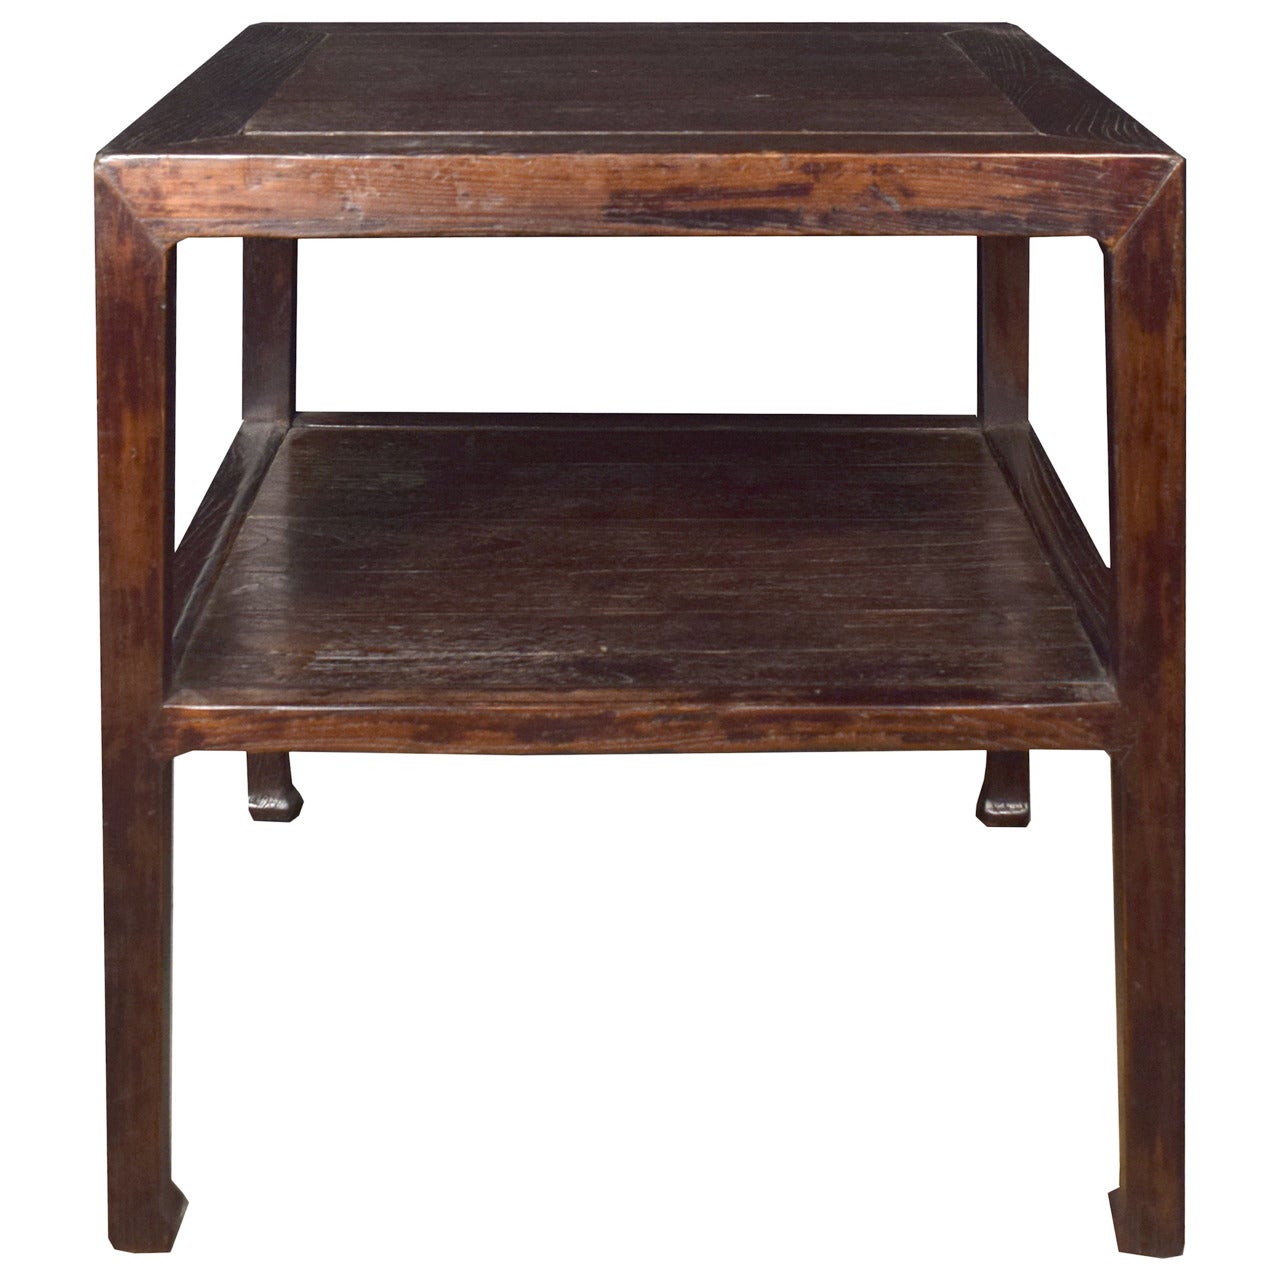 19th Century Chinese Square Table with Hoof Feet and Shelf